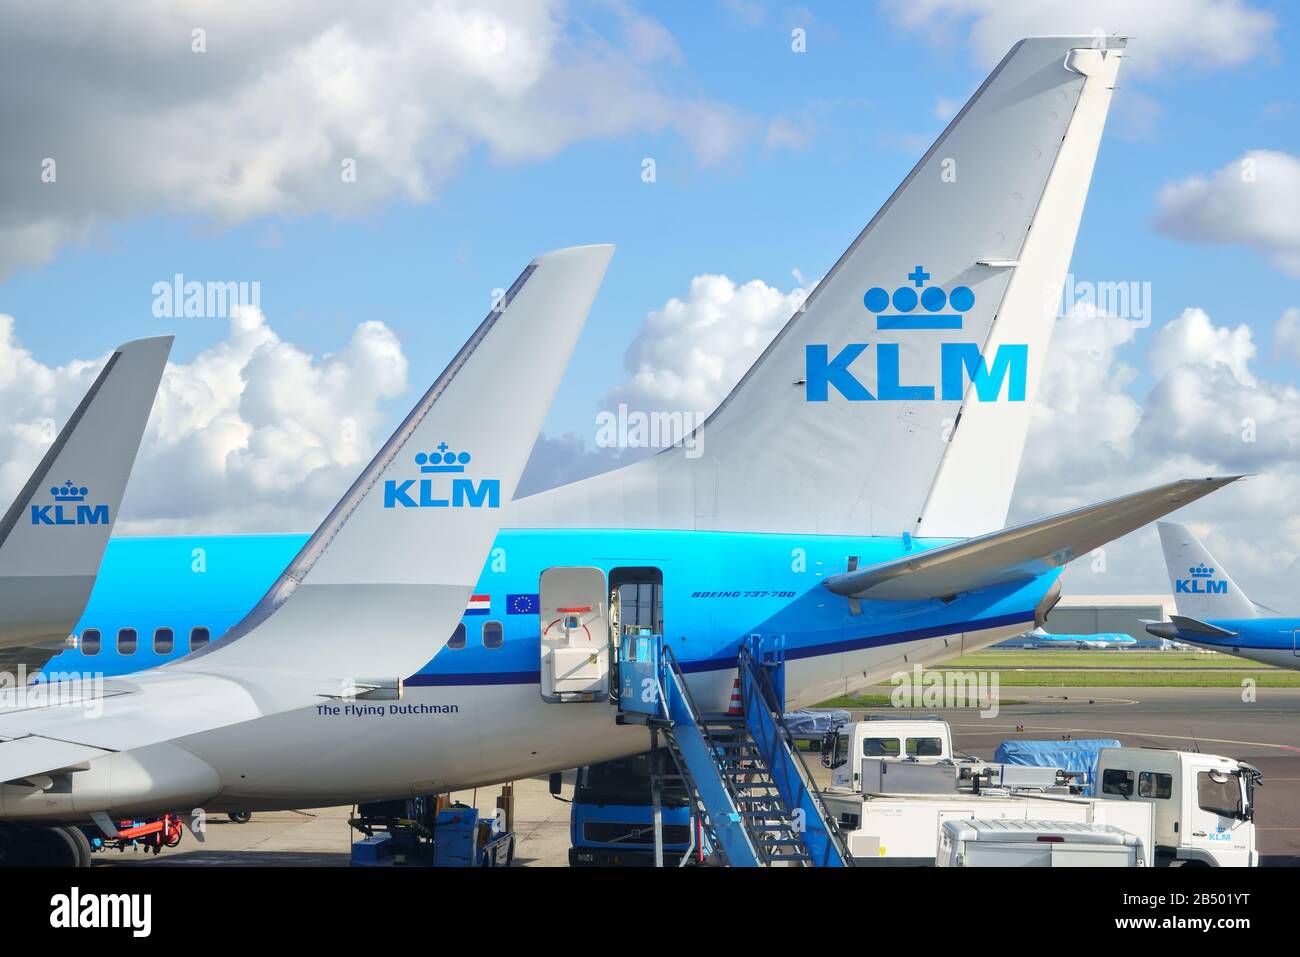 AMSTERDAM, NETHERLANDS - MARCH 03, 2020: KLM Royal Dutch Airlines at Amsterdam Airport Schiphol. Stock Photo